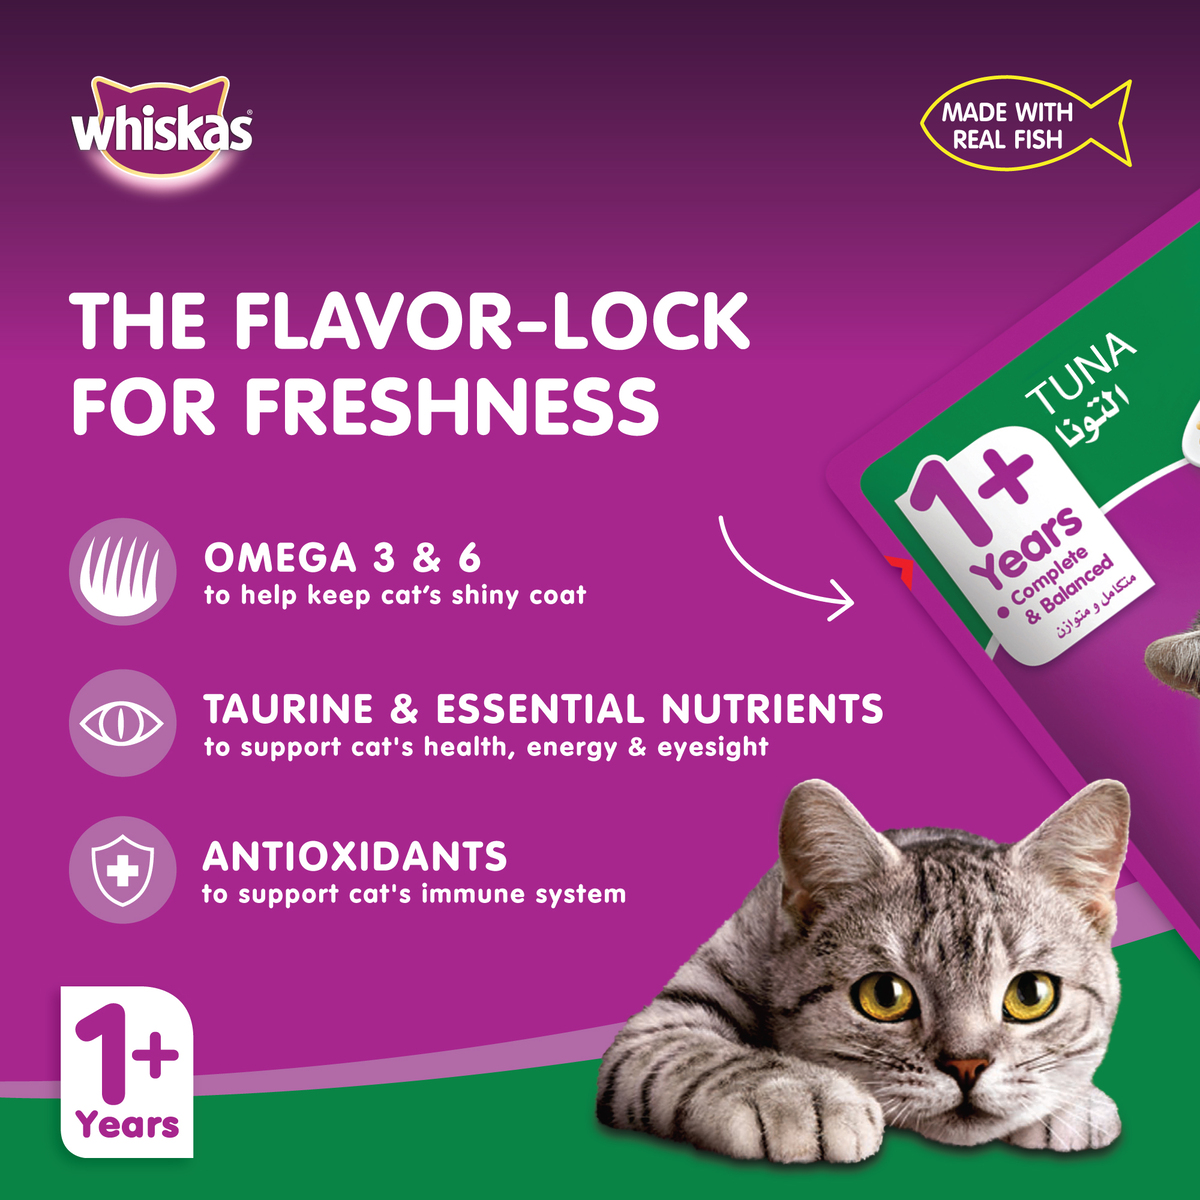 Whiskas Wet Cat Food Tuna Made with Real Fish Pouch for Adult Cats 1+ Years 80 g